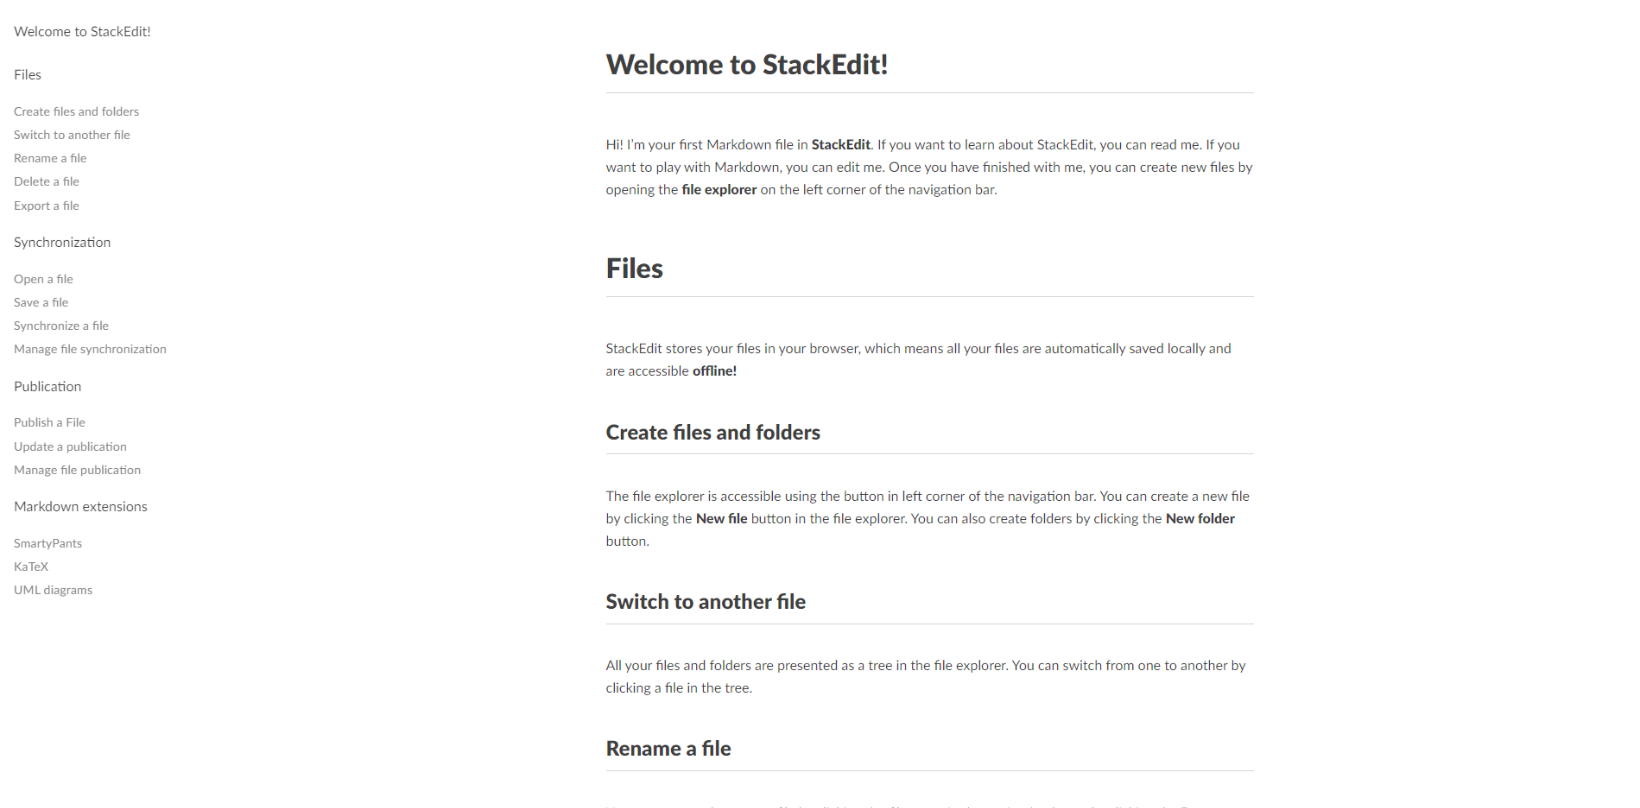 HTML page generated by StackEdit from a markdown document.